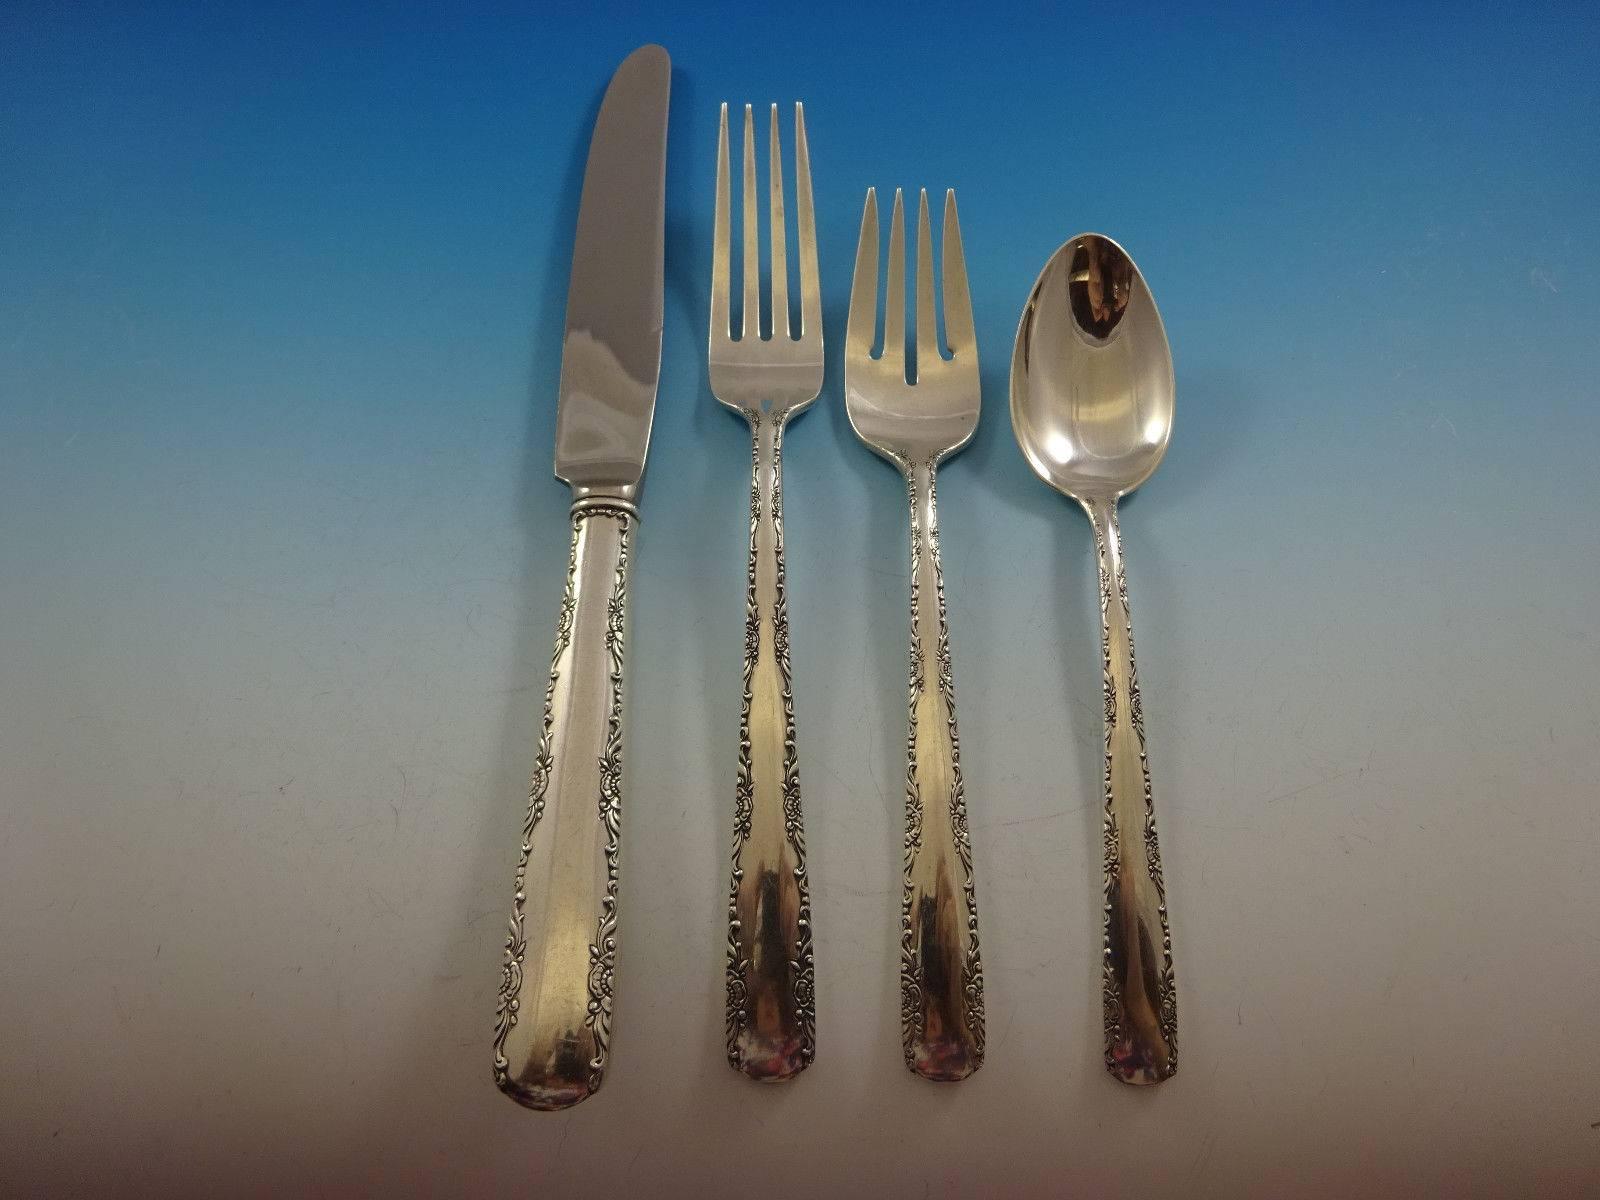 Camellia by Gorham sterling silver flatware set - 48 pieces. This set includes: eight knives, 8 3/4